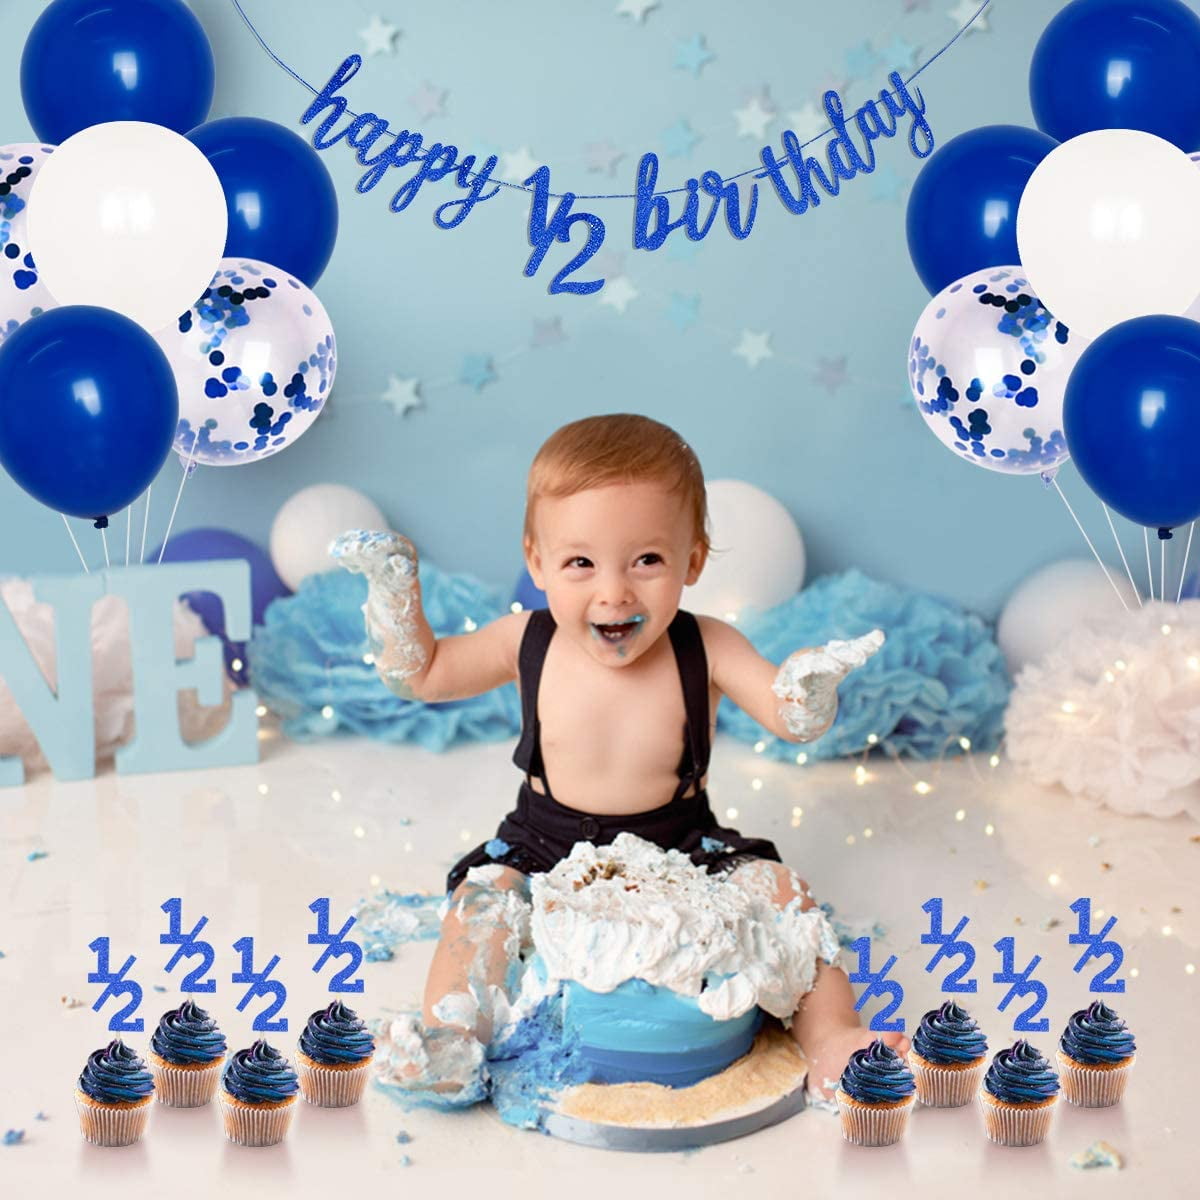 Half Birthday Decorations Blue for Boys Half Year Happy 1/2 Birthday Banner Cake Topper Balloons for 6 Months Party Decorations - Walmart.com